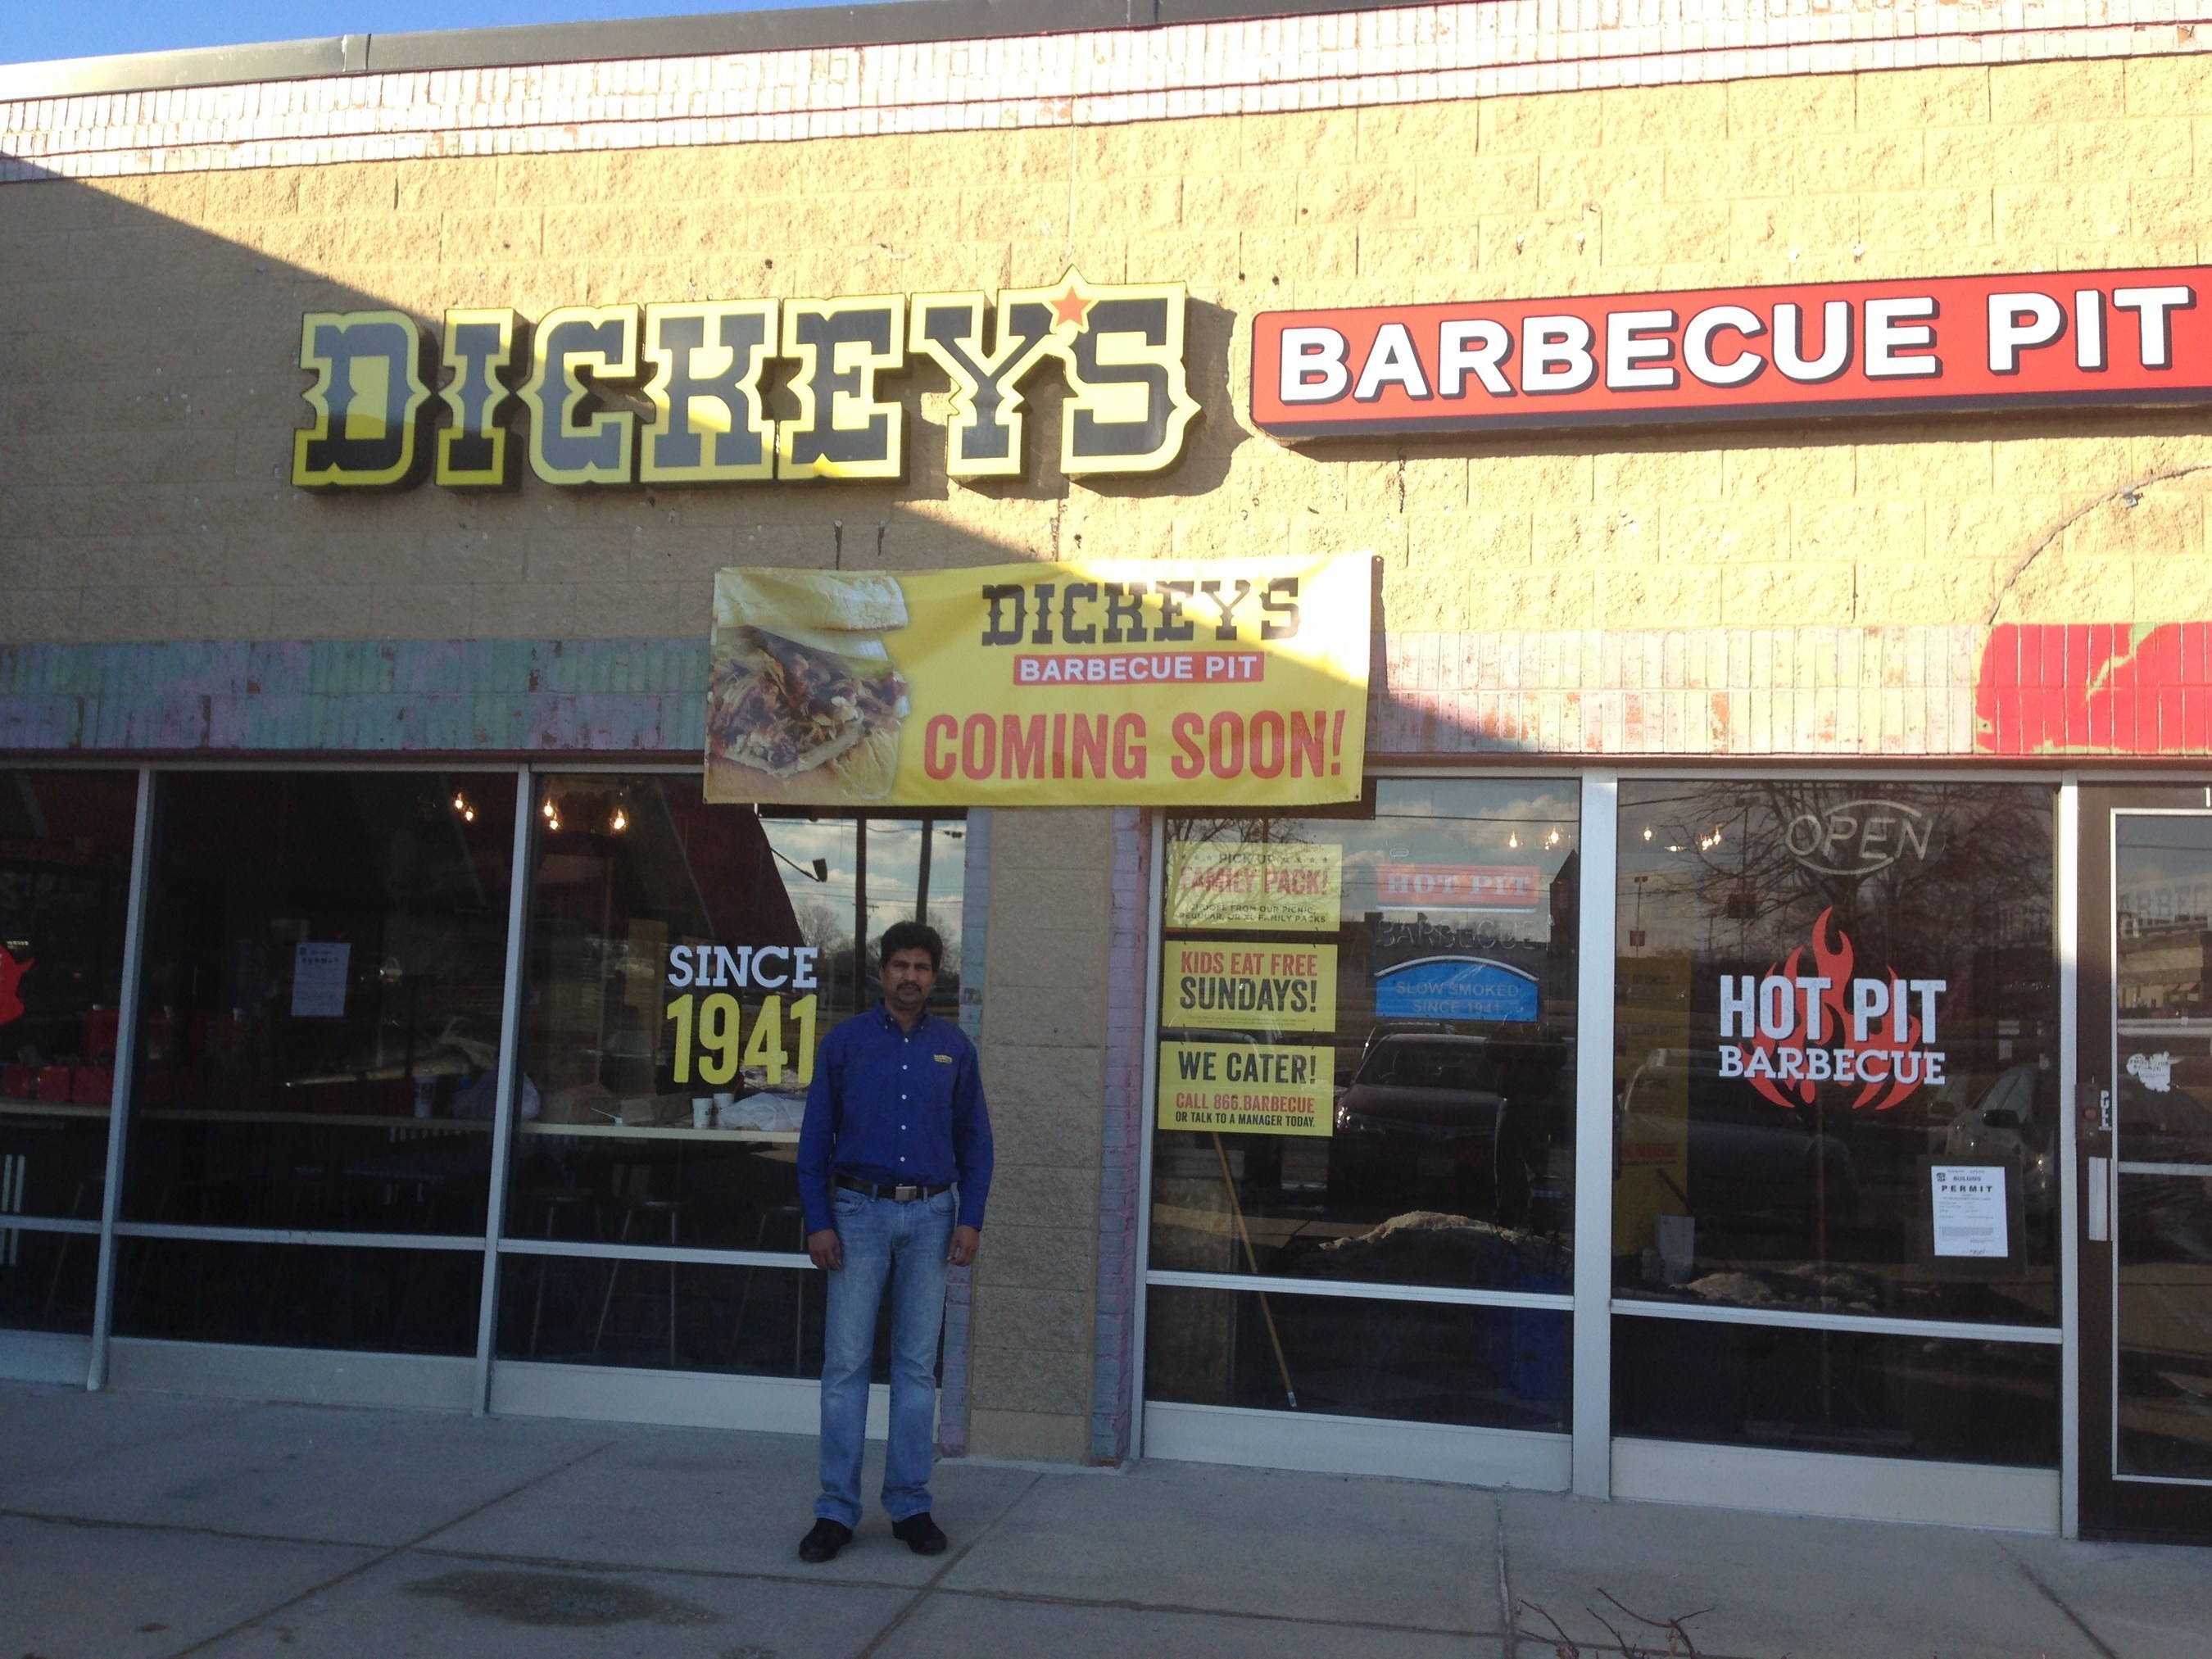 Dickey's Barbecue Pit arrives in Downers Grove on Thursday with a three day grand opening celebration where the first 50 guests receive gift cards.